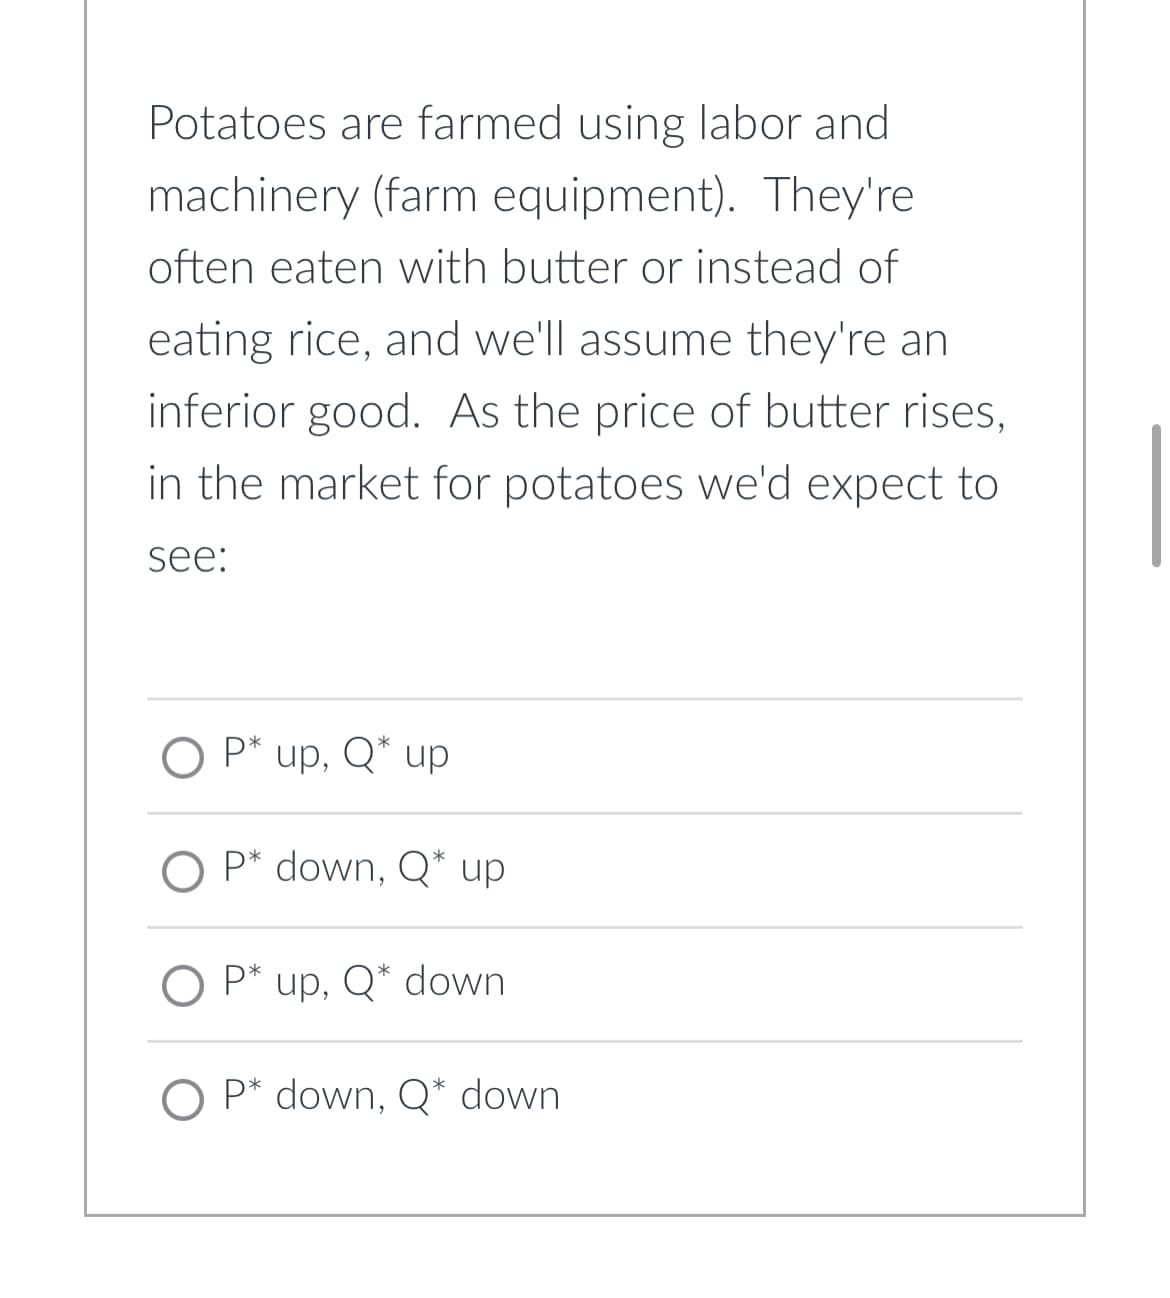 Potatoes are farmed using labor and
machinery (farm equipment). They're
often eaten with butter or instead of
eating rice, and we'll assume they're an
inferior good. As the price of butter rises,
in the market for potatoes we'd expect to
see:
O P* up, Q* up
O P* down, Q* up
O P* up, Q* down
O P* down, Q* down